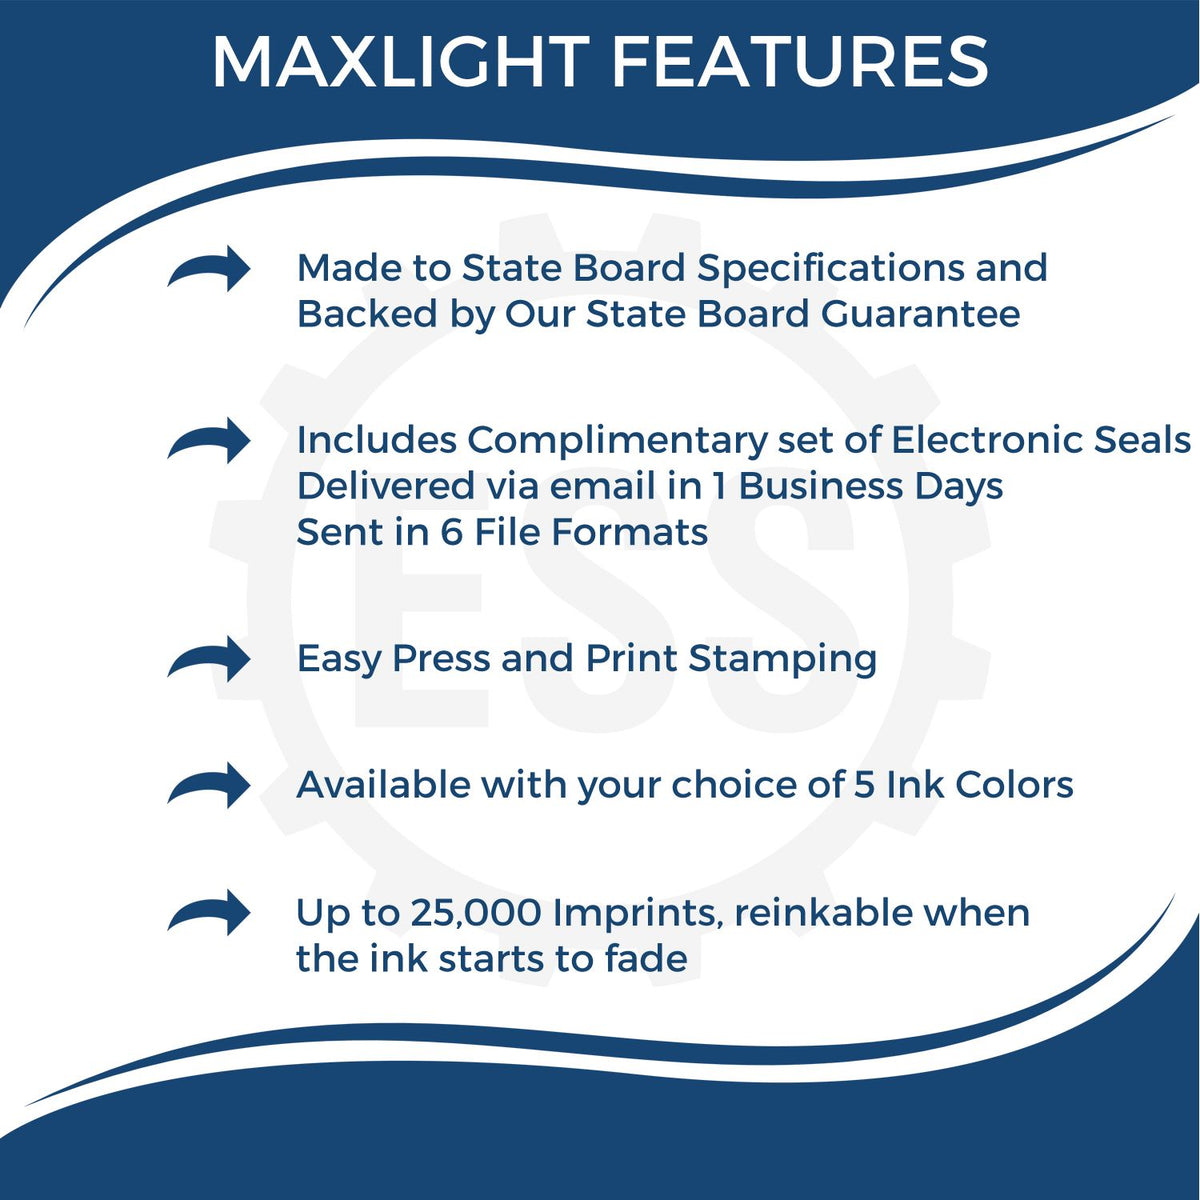 A picture of an infographic highlighting the selling points for the MaxLight Premium Pre-Inked South Carolina State Seal Notarial Stamp